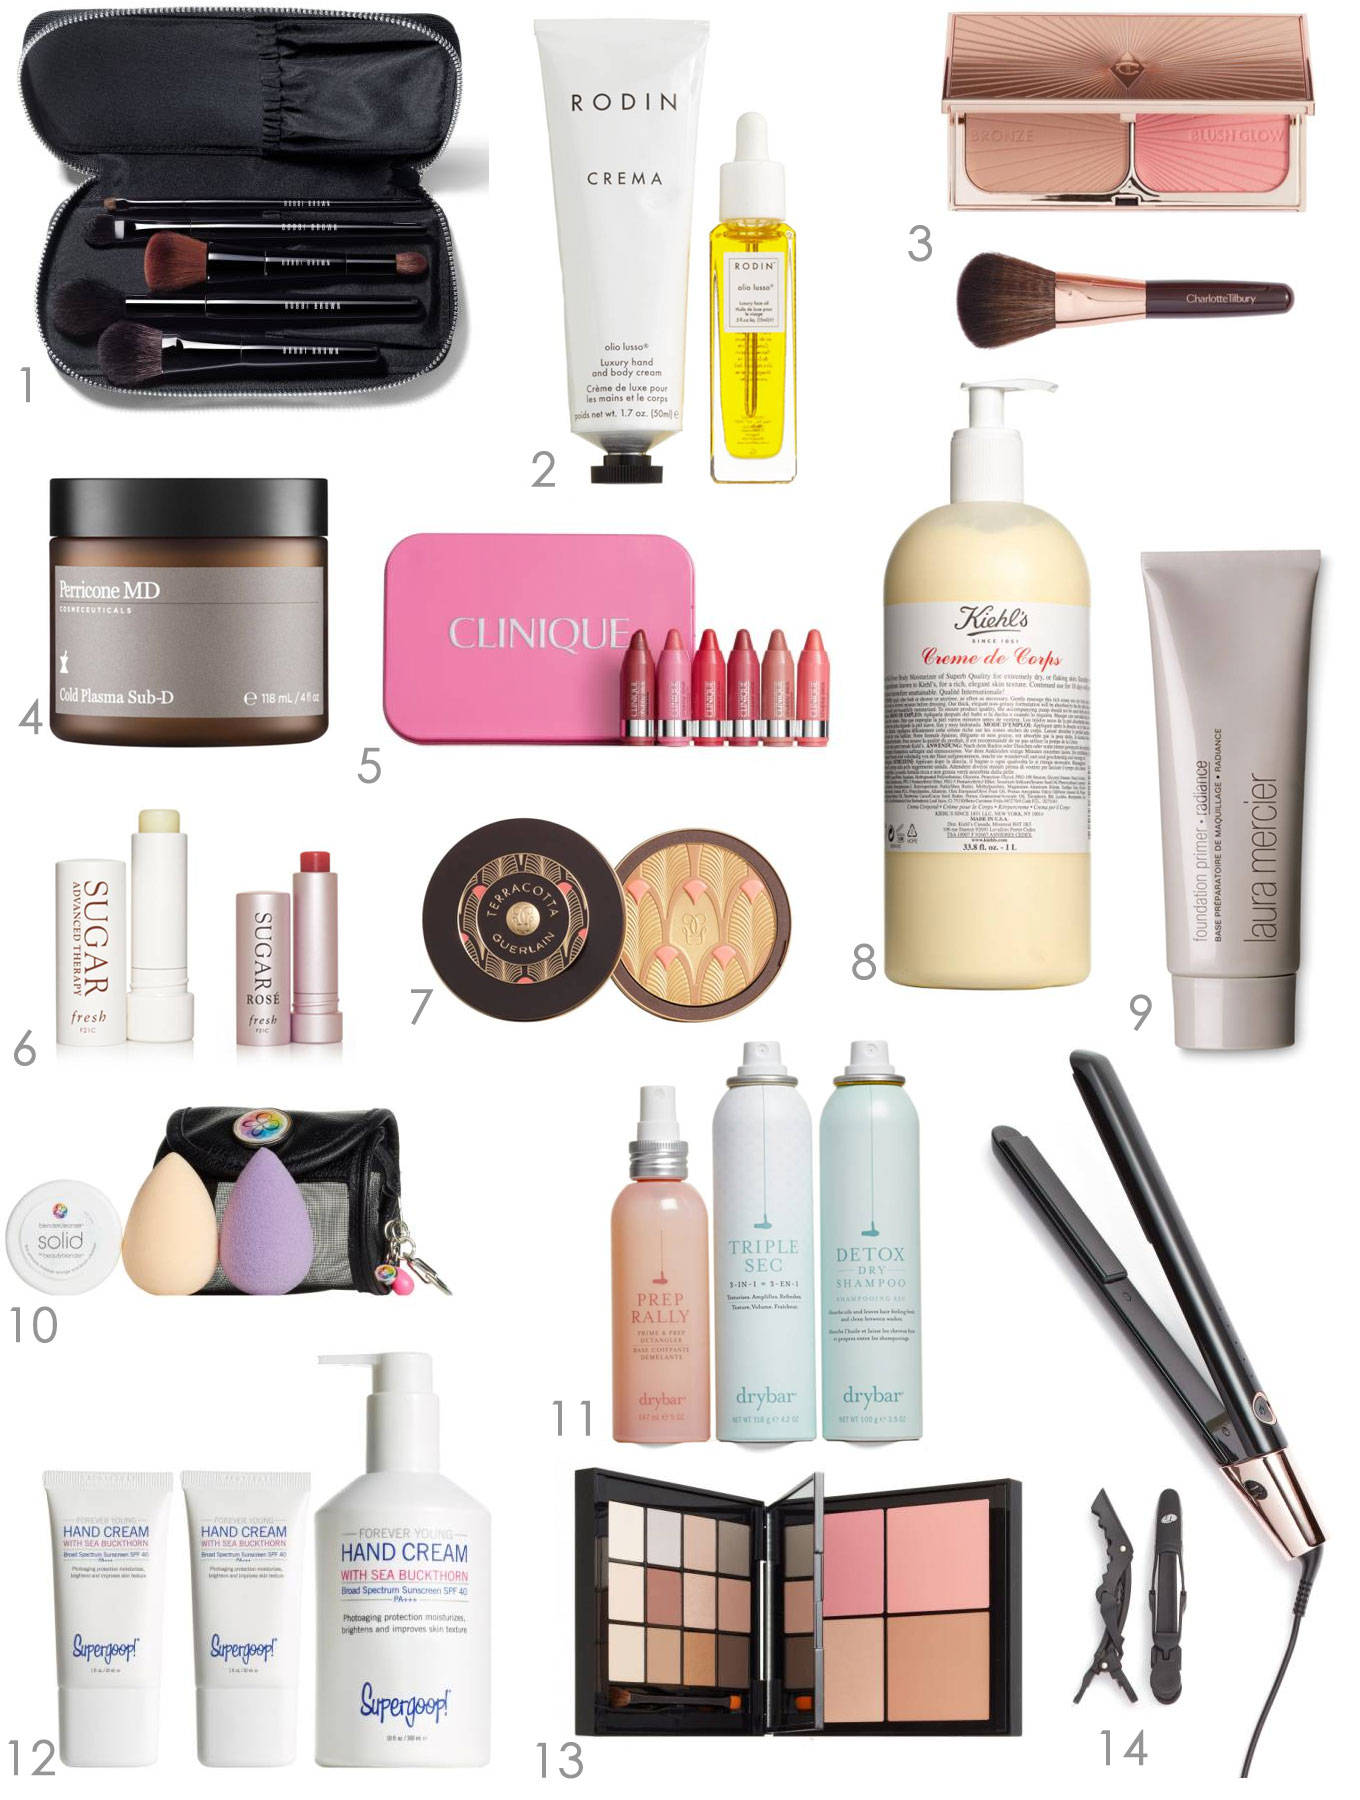 Ridgely Brode's picks her favorite beauty items from the Nordstrom Anniversary Sale Early Access and shares them on her blog, Ridgely's Radar.